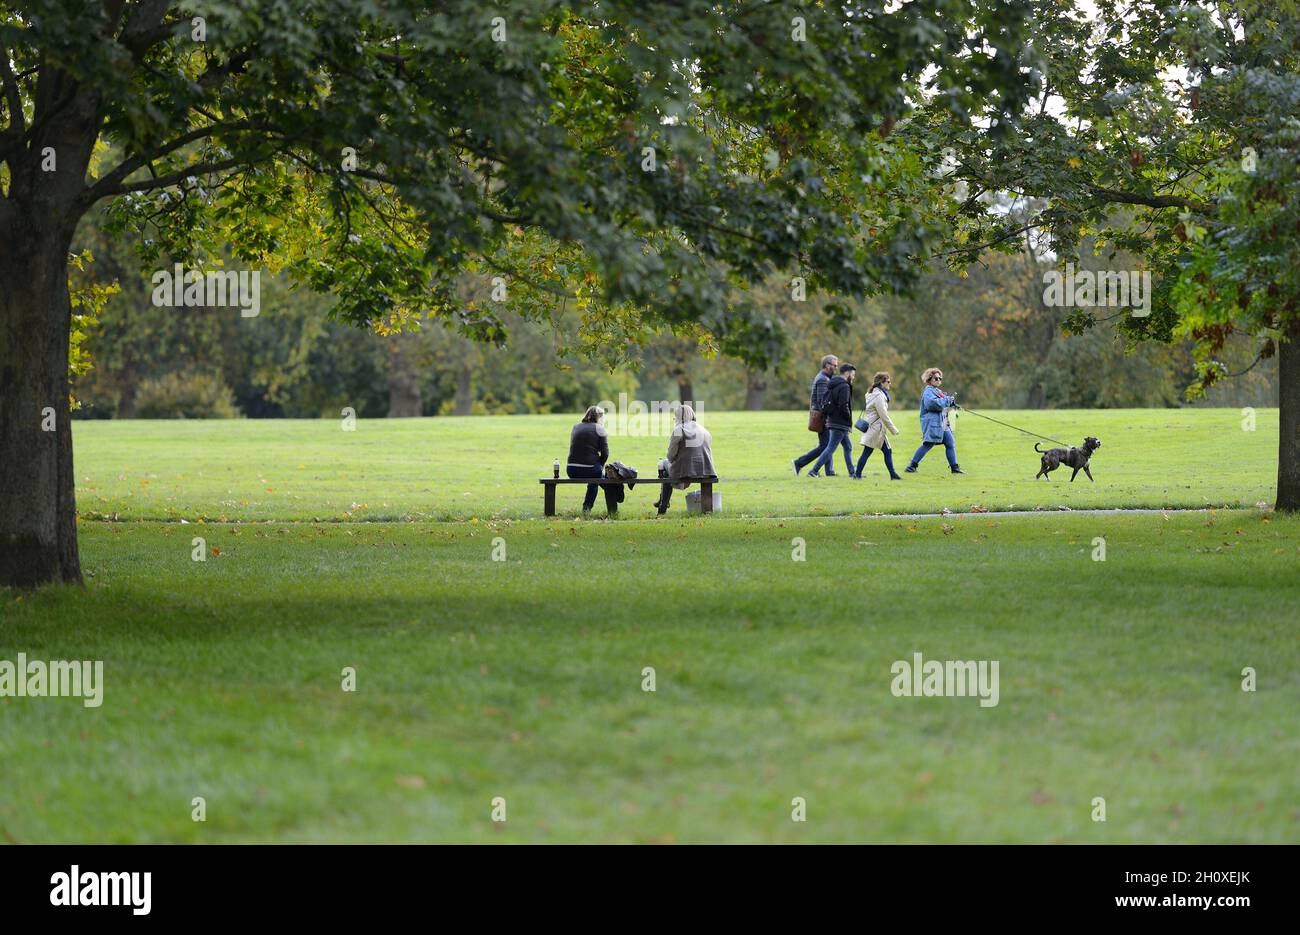 London, England, UK. Regent's Park: two women talking on a bench, people walking past with a dog Stock Photo